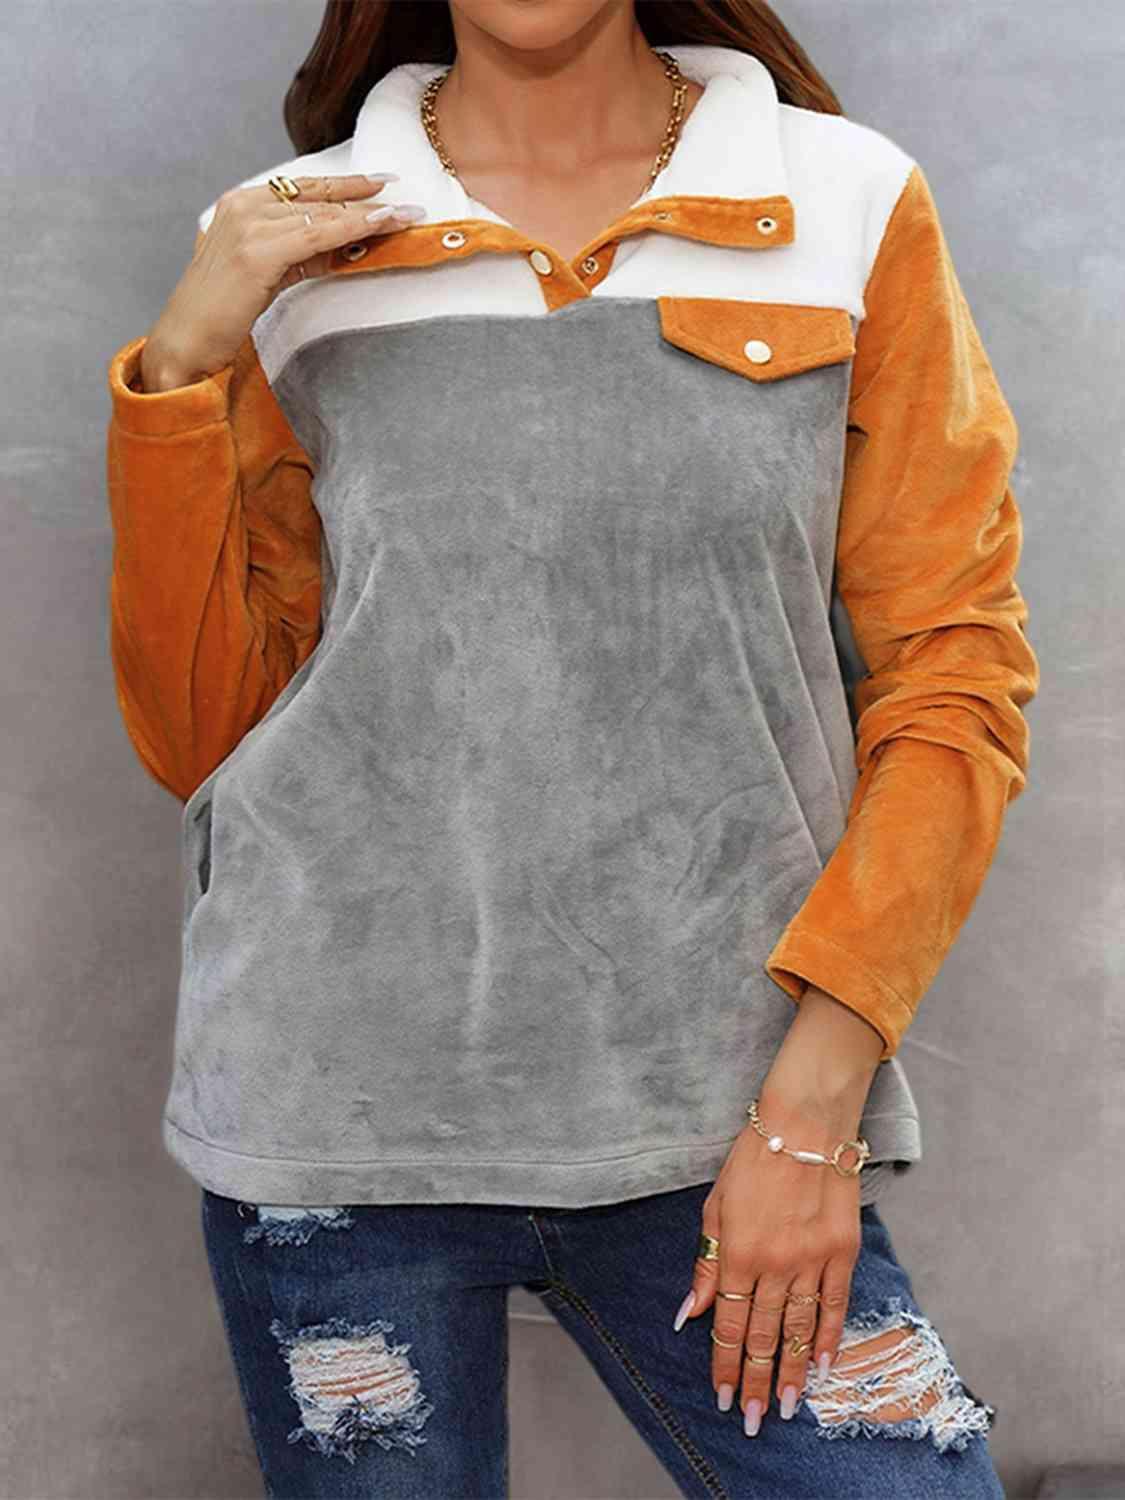 a woman wearing a grey and orange top